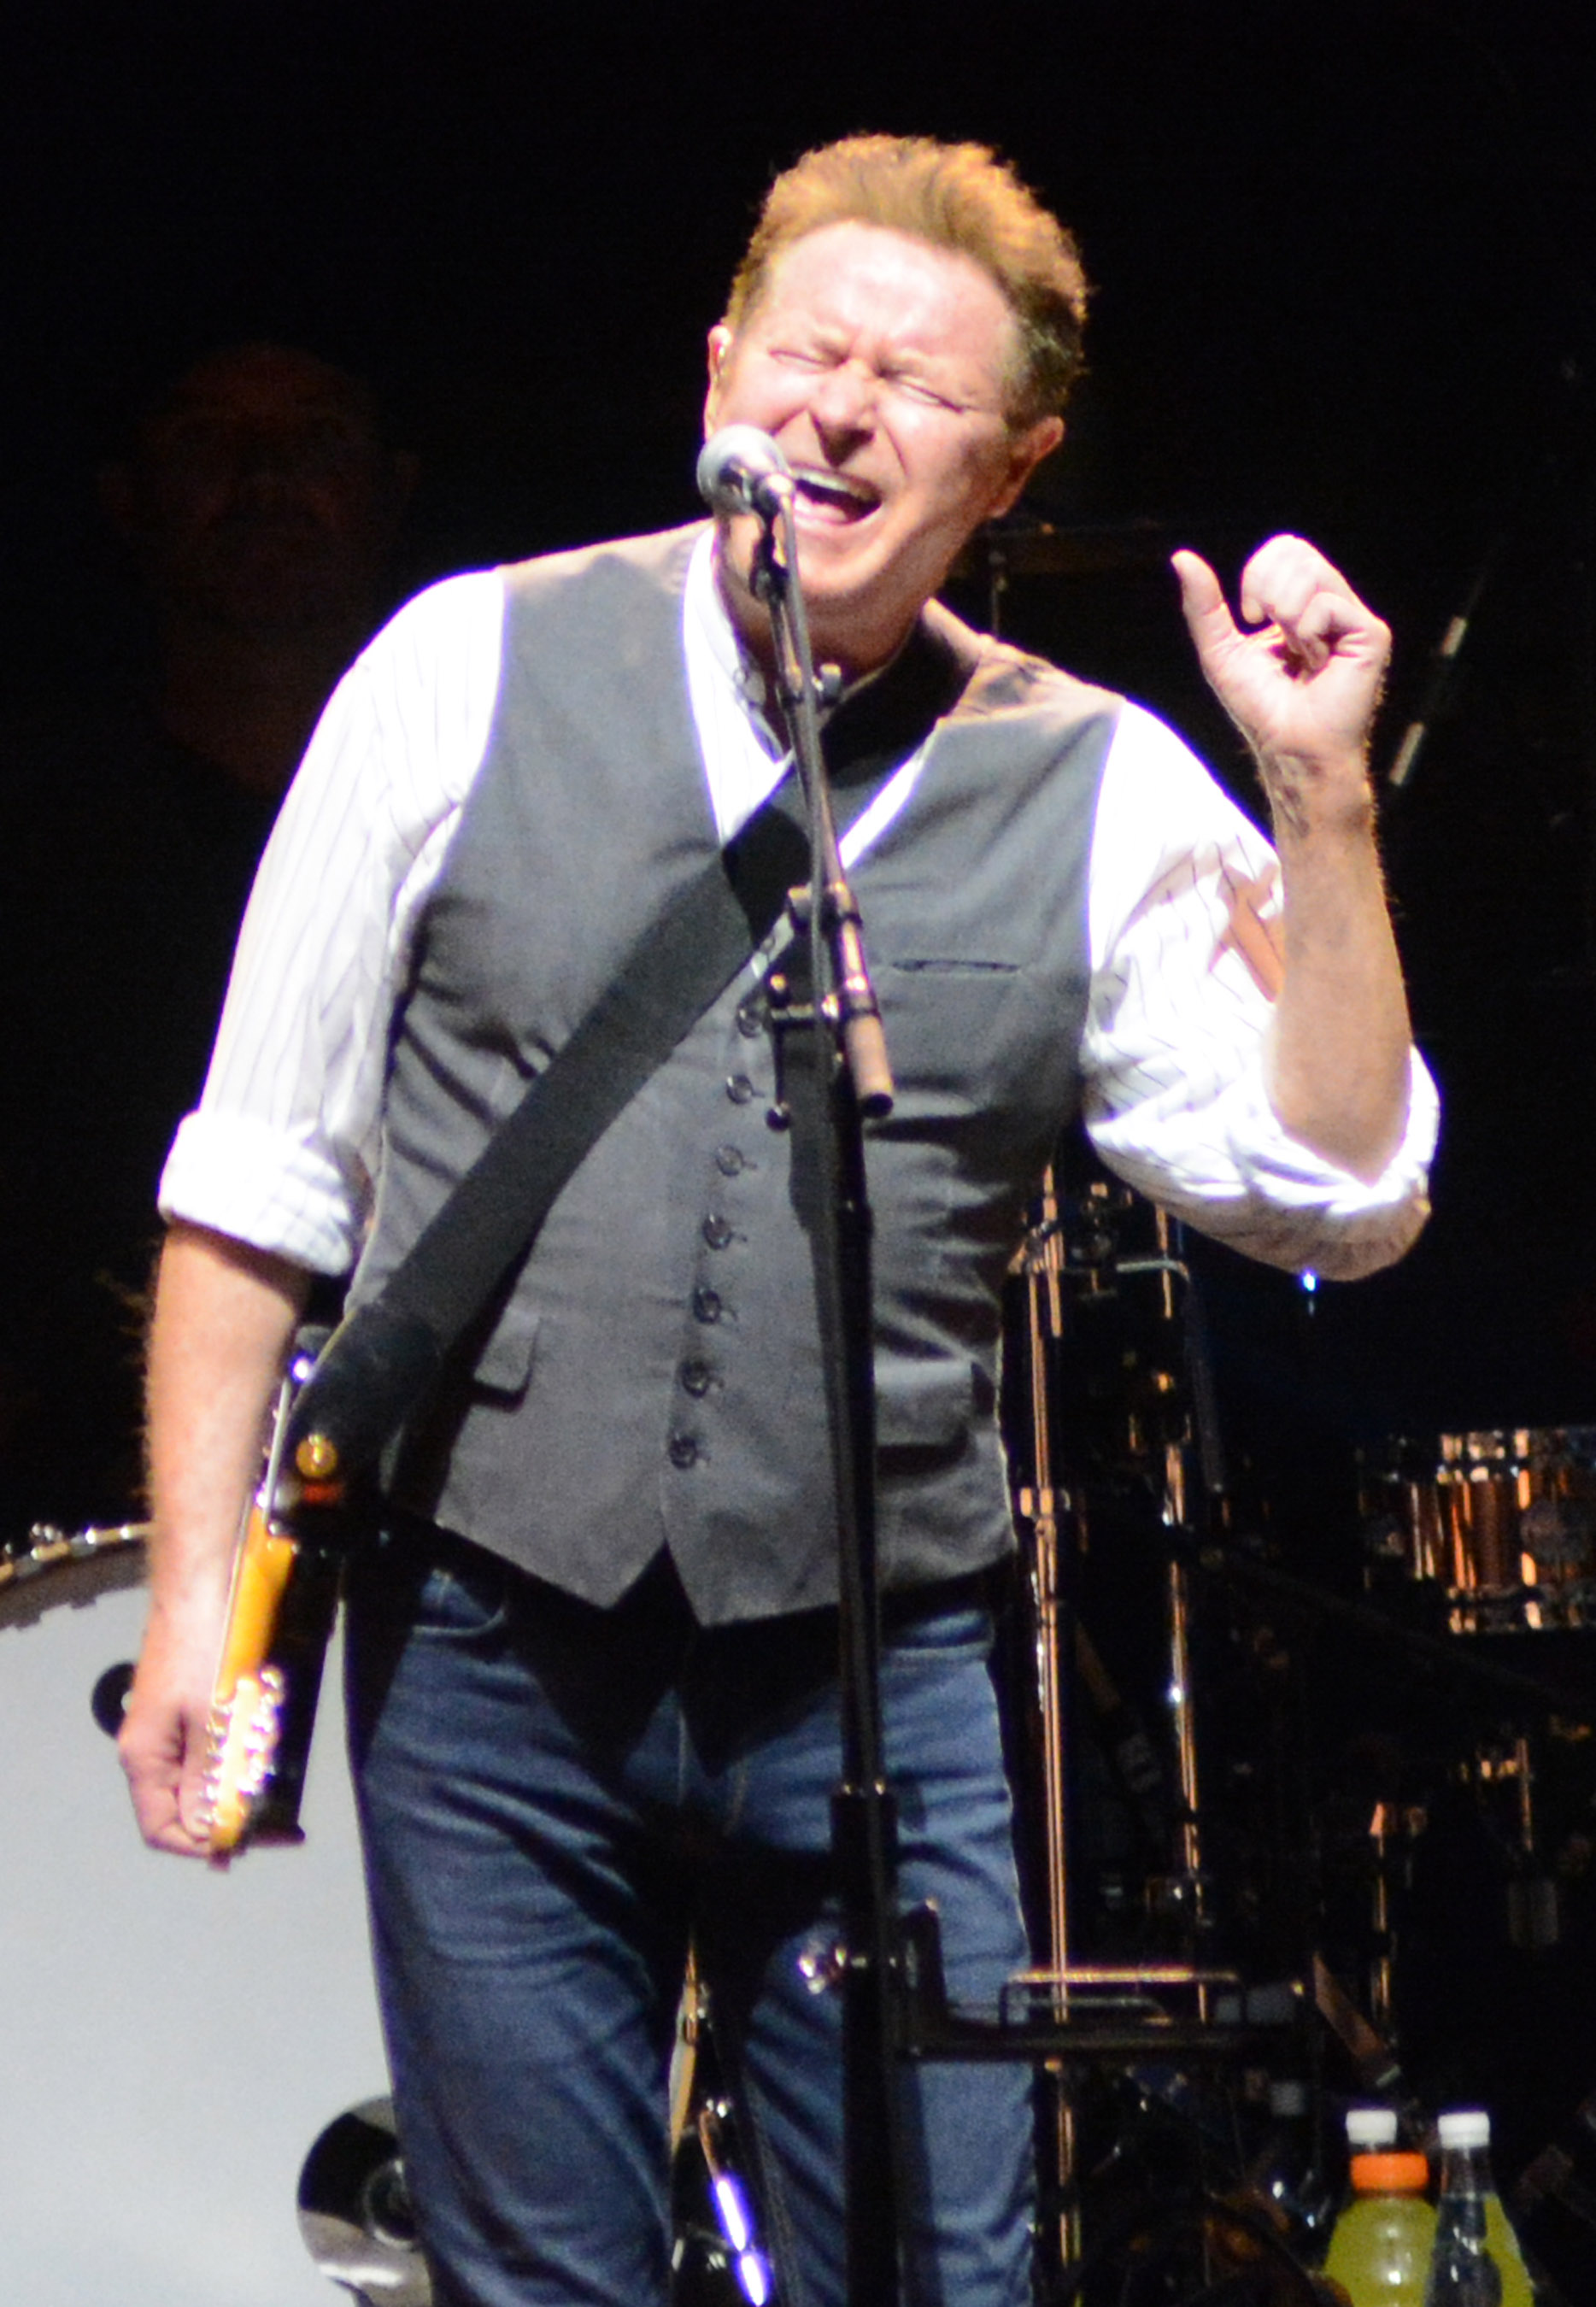 DON HENLEY MIXES EAGLES, SOLO HITS AT POIGNANT SANDS SHOW